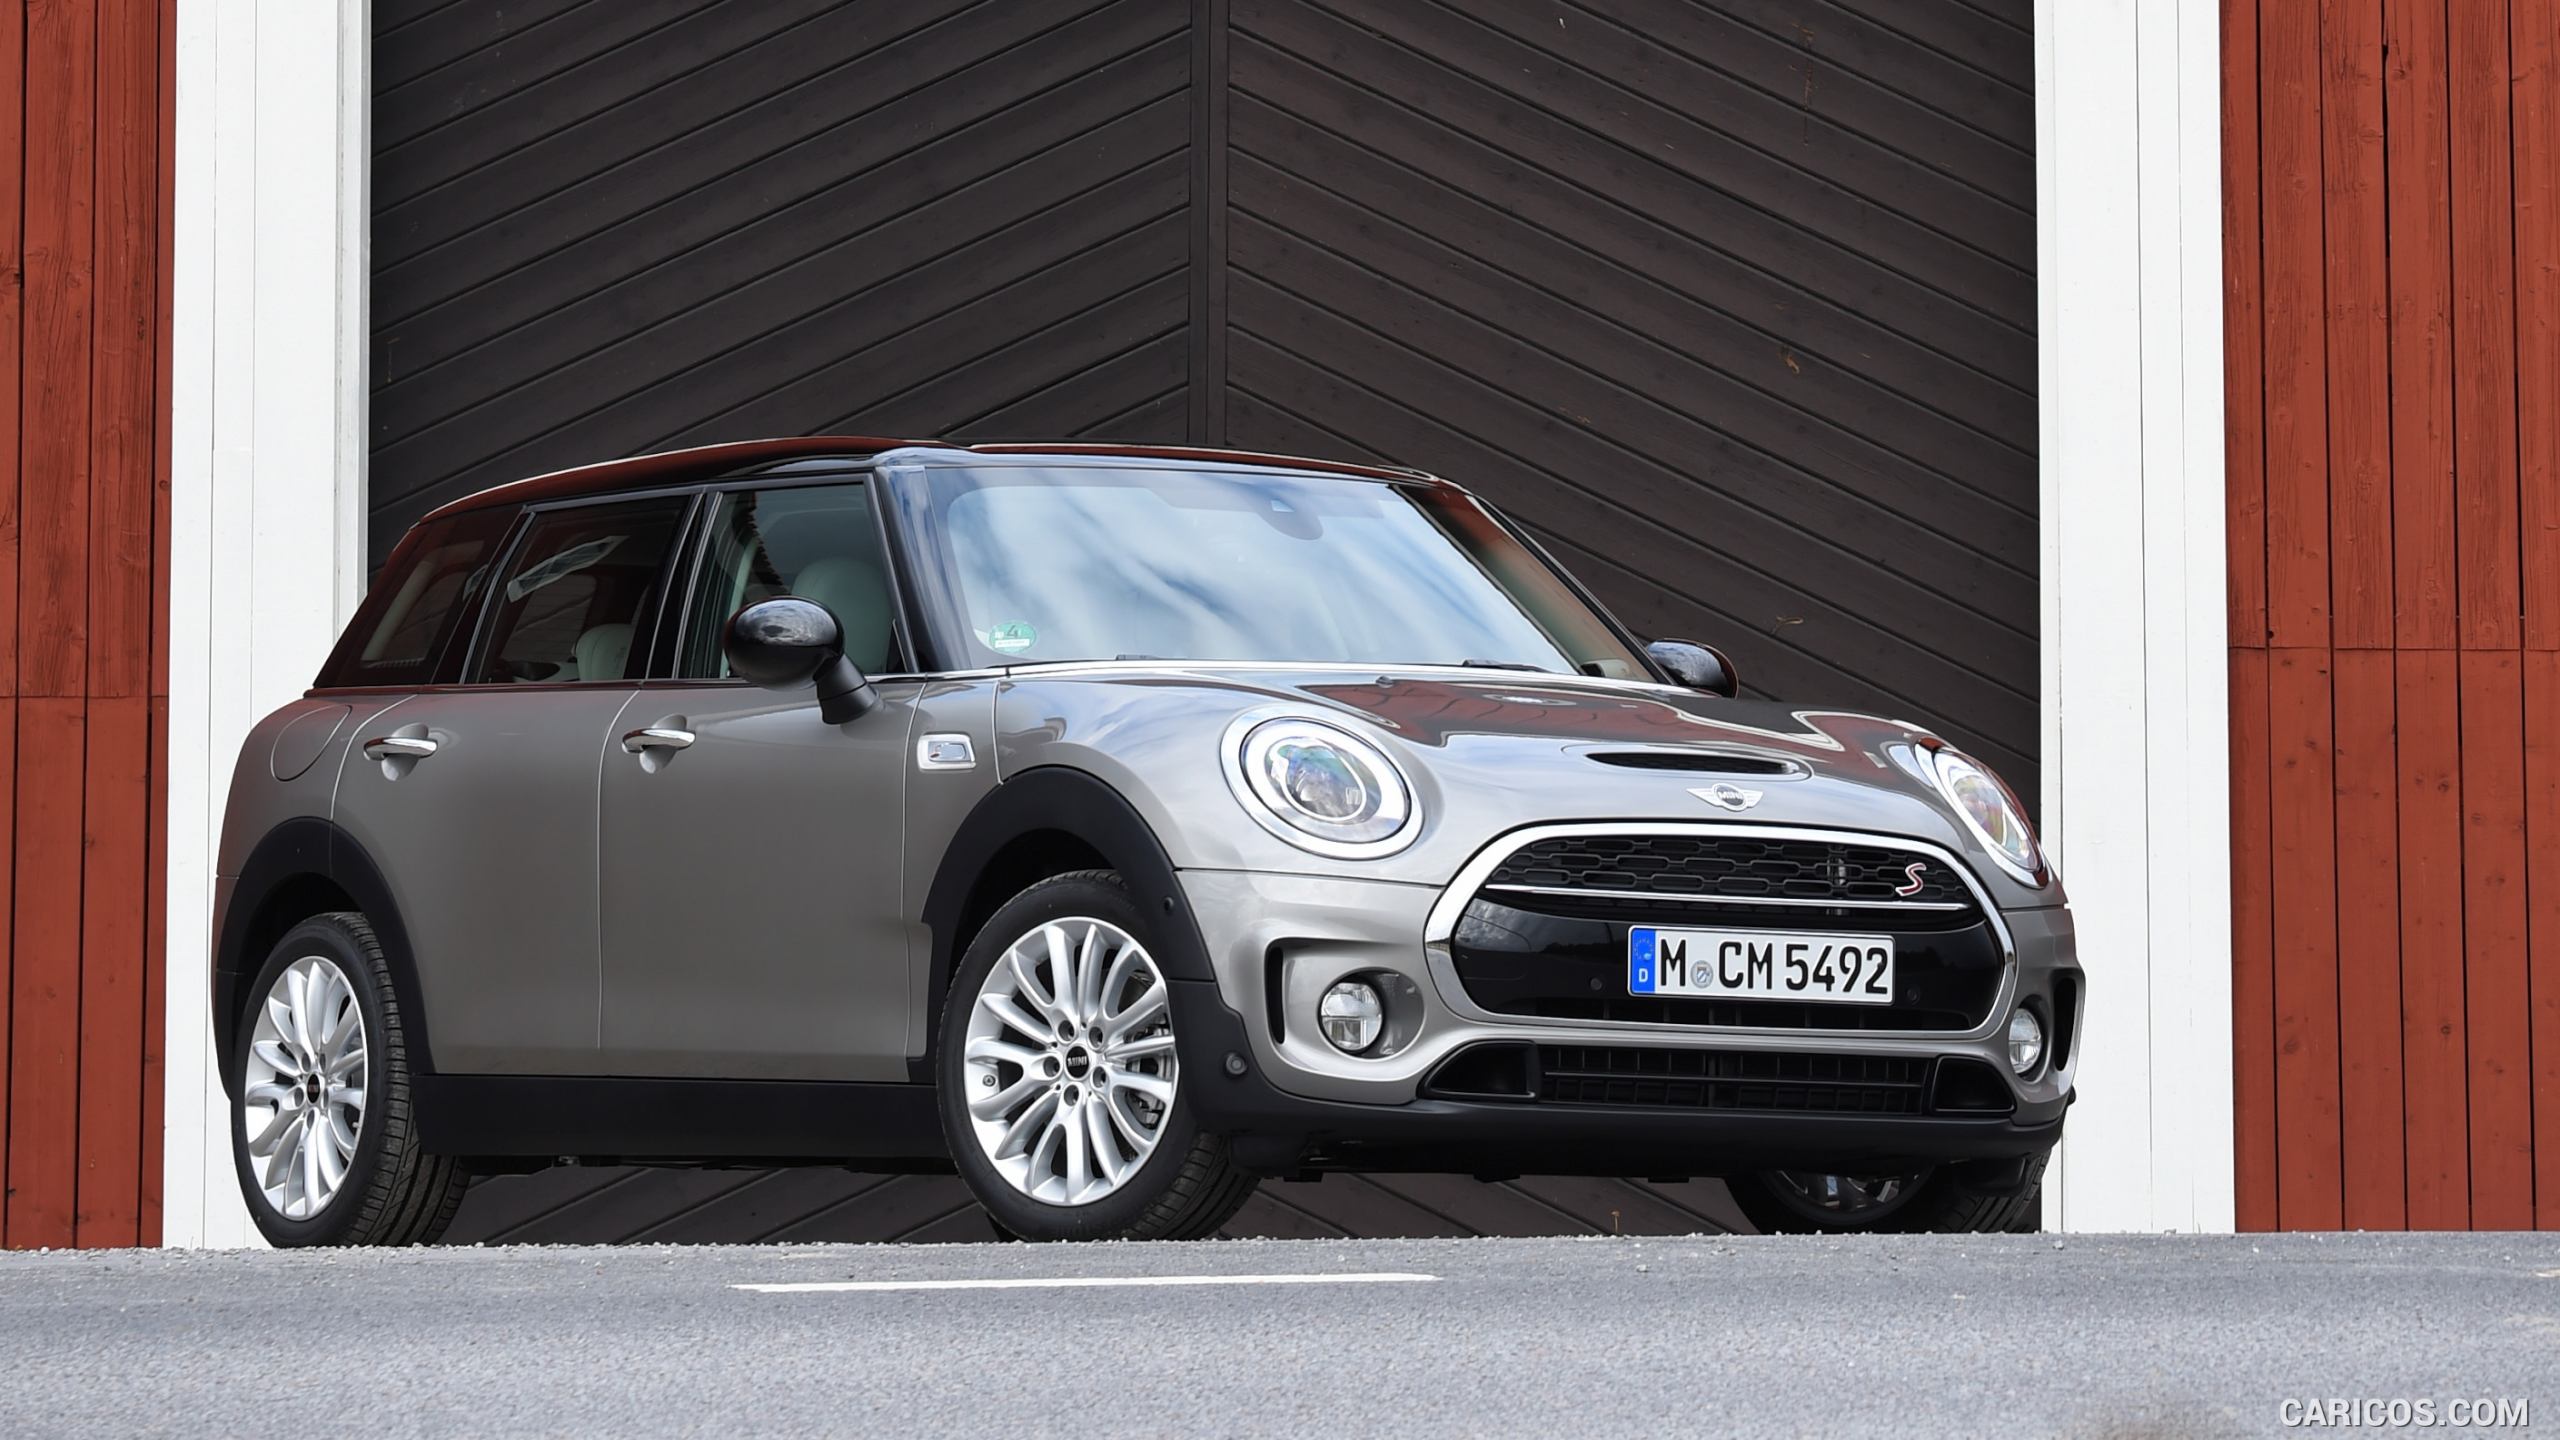 2016 MINI Cooper S Clubman in Metallic Melting Silver - Front, #199 of 380